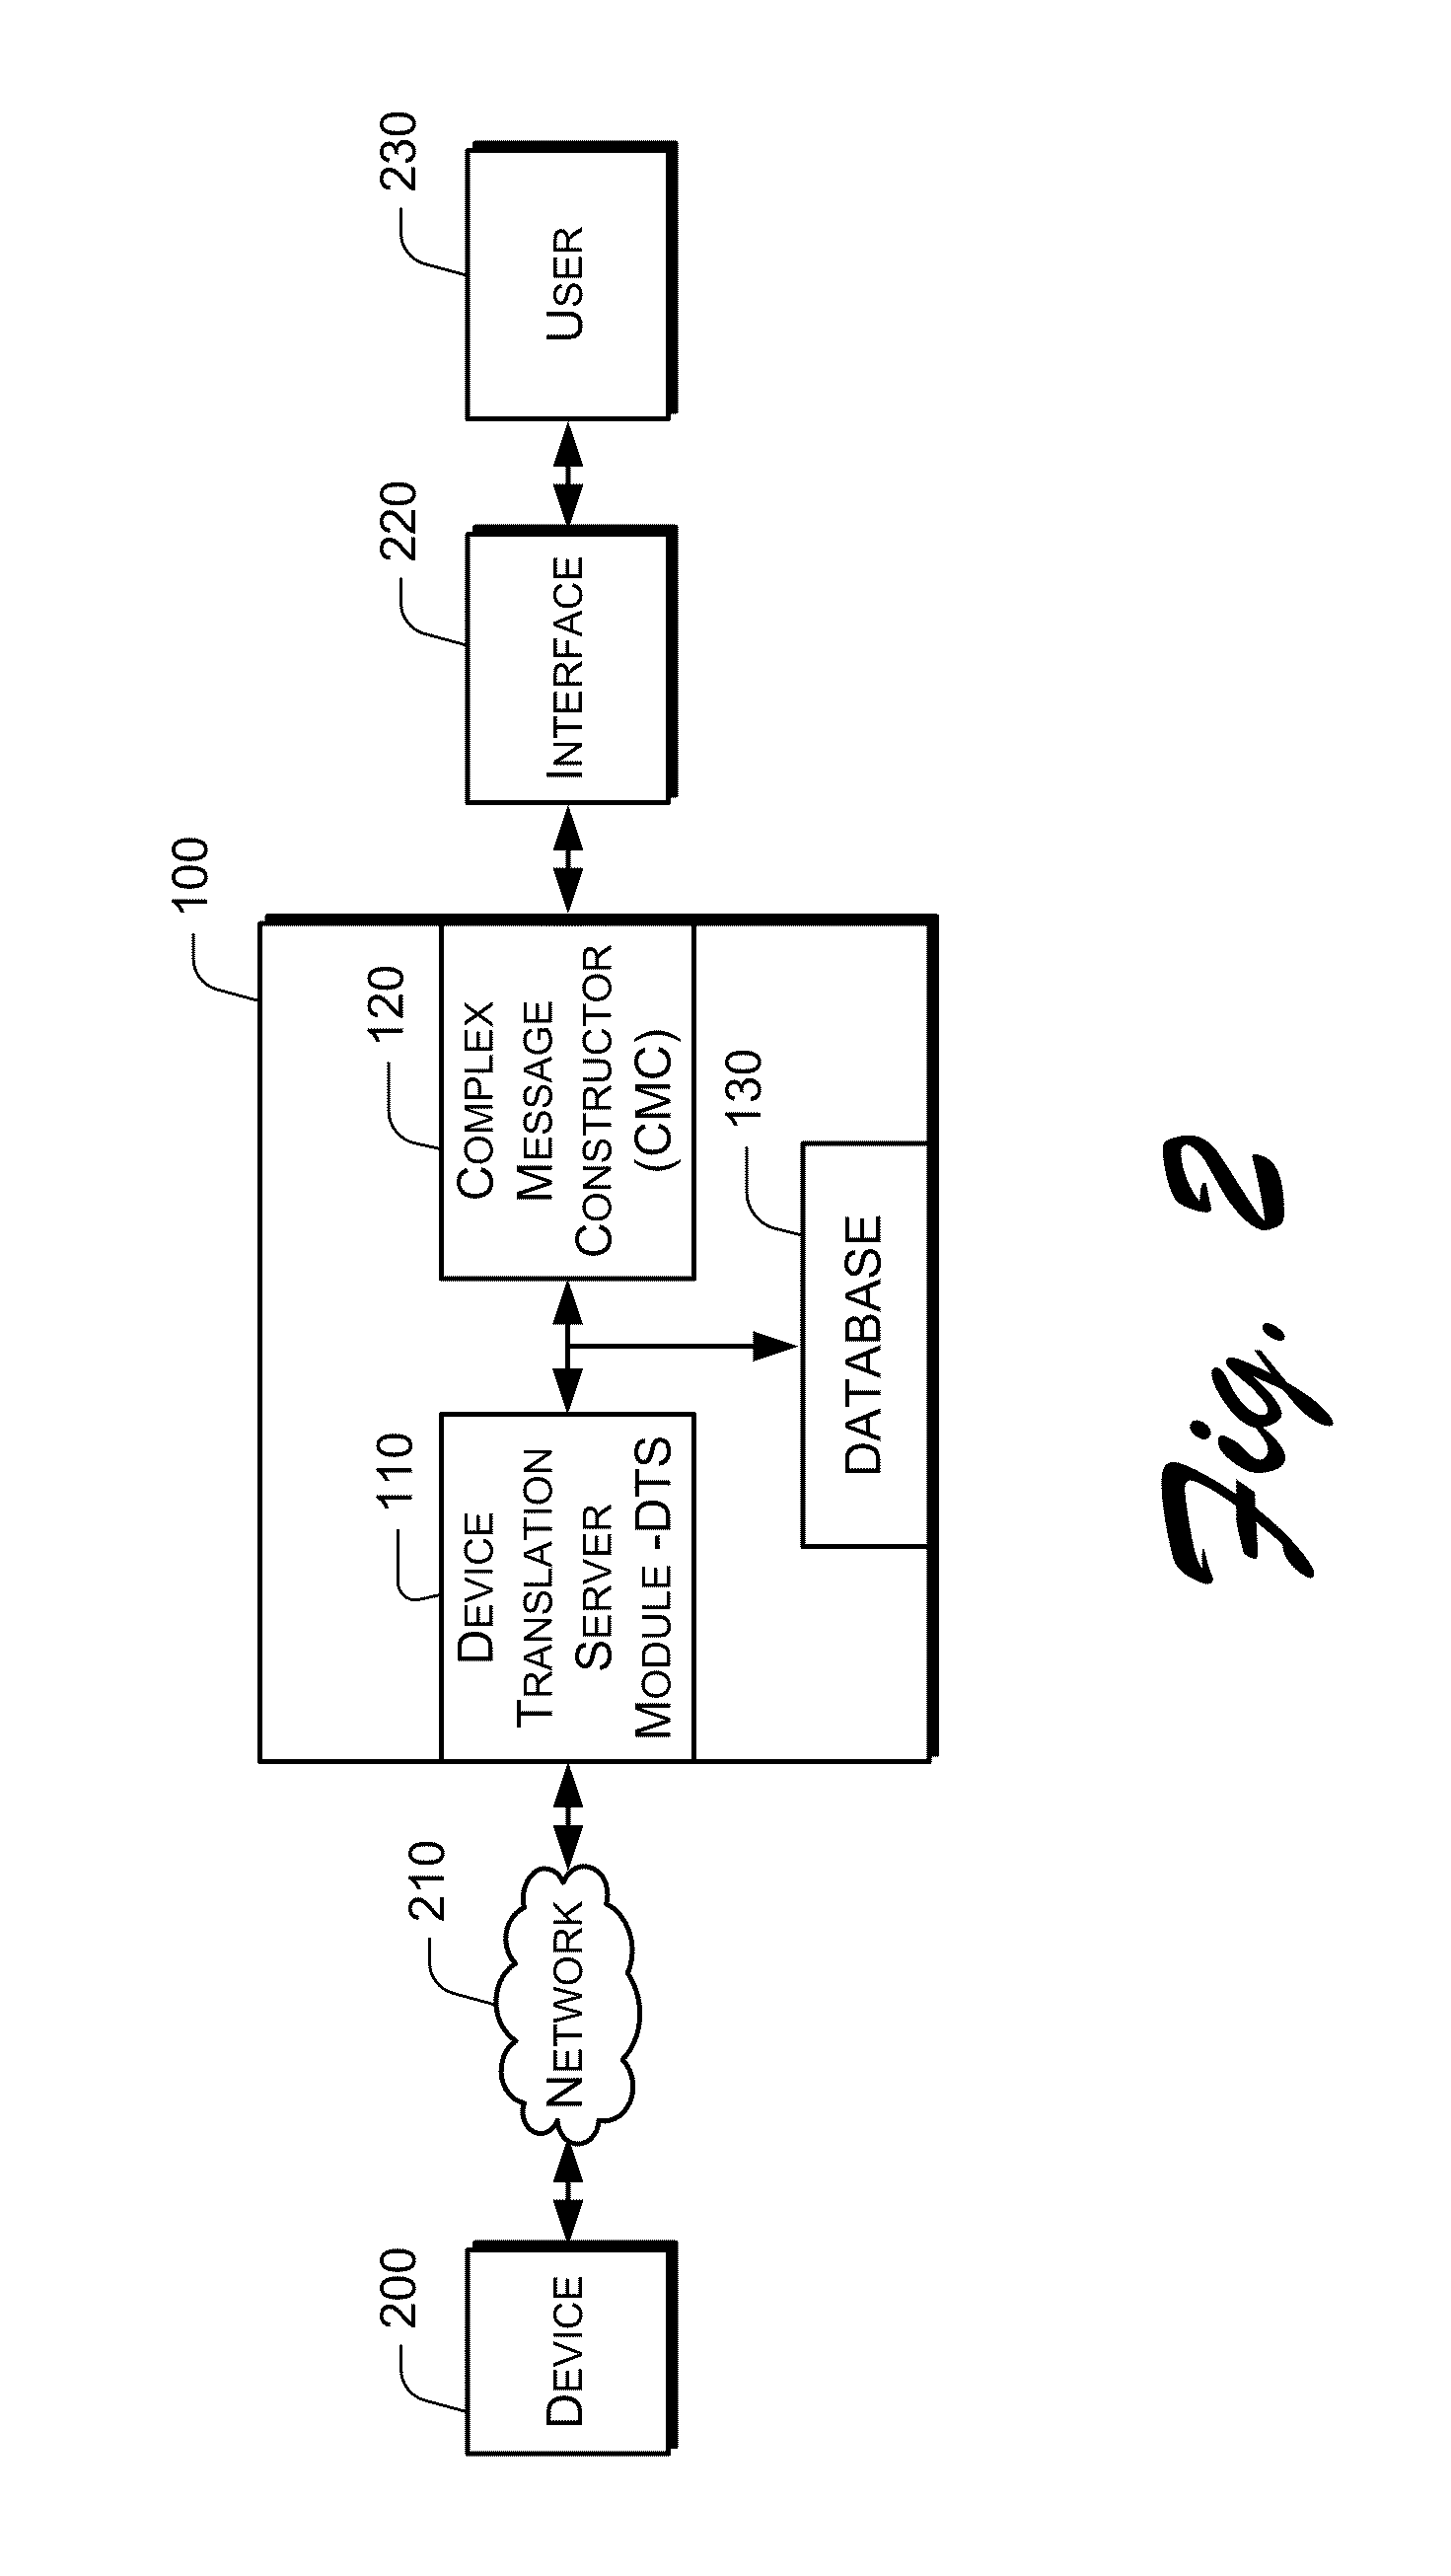 System for electronic device monitoring